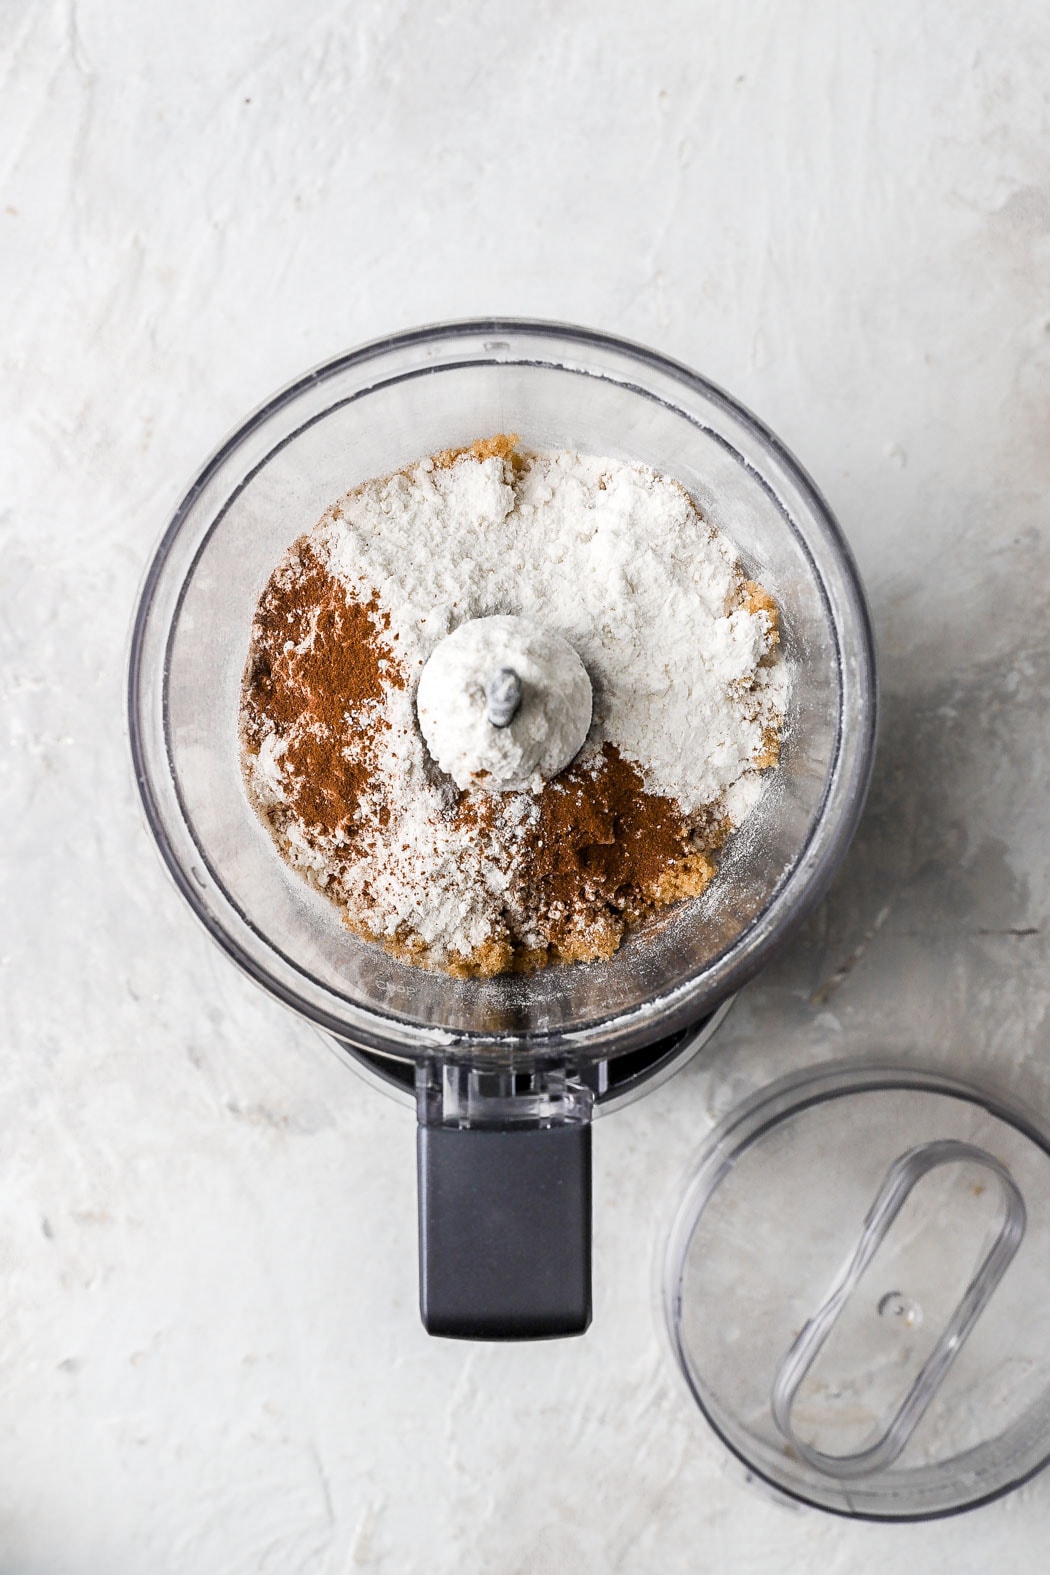 combine the dry ingredients in the food processor